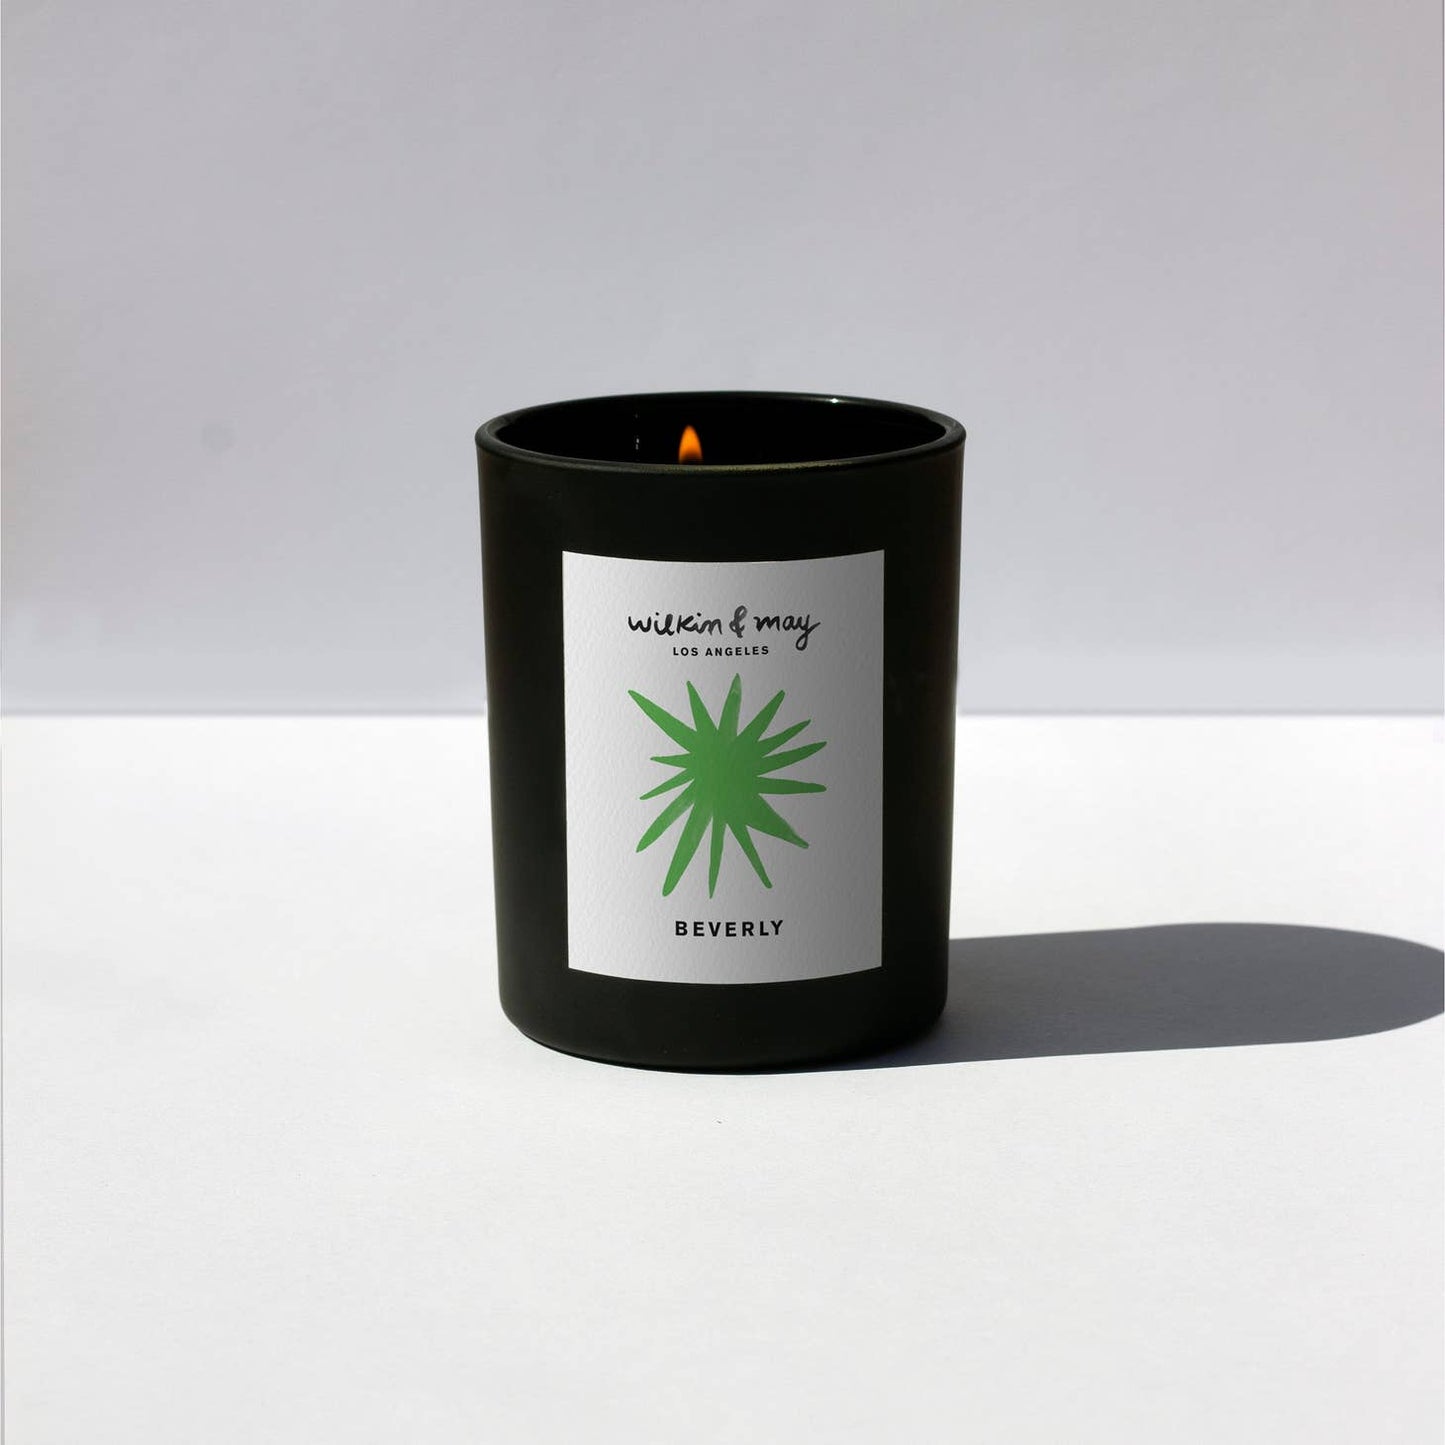 An organic coconut wax blend with notes of spicy mint, coriander, pepper, cardamom, & jasmine. Essential oil & fragrance blend with a lead free wick.